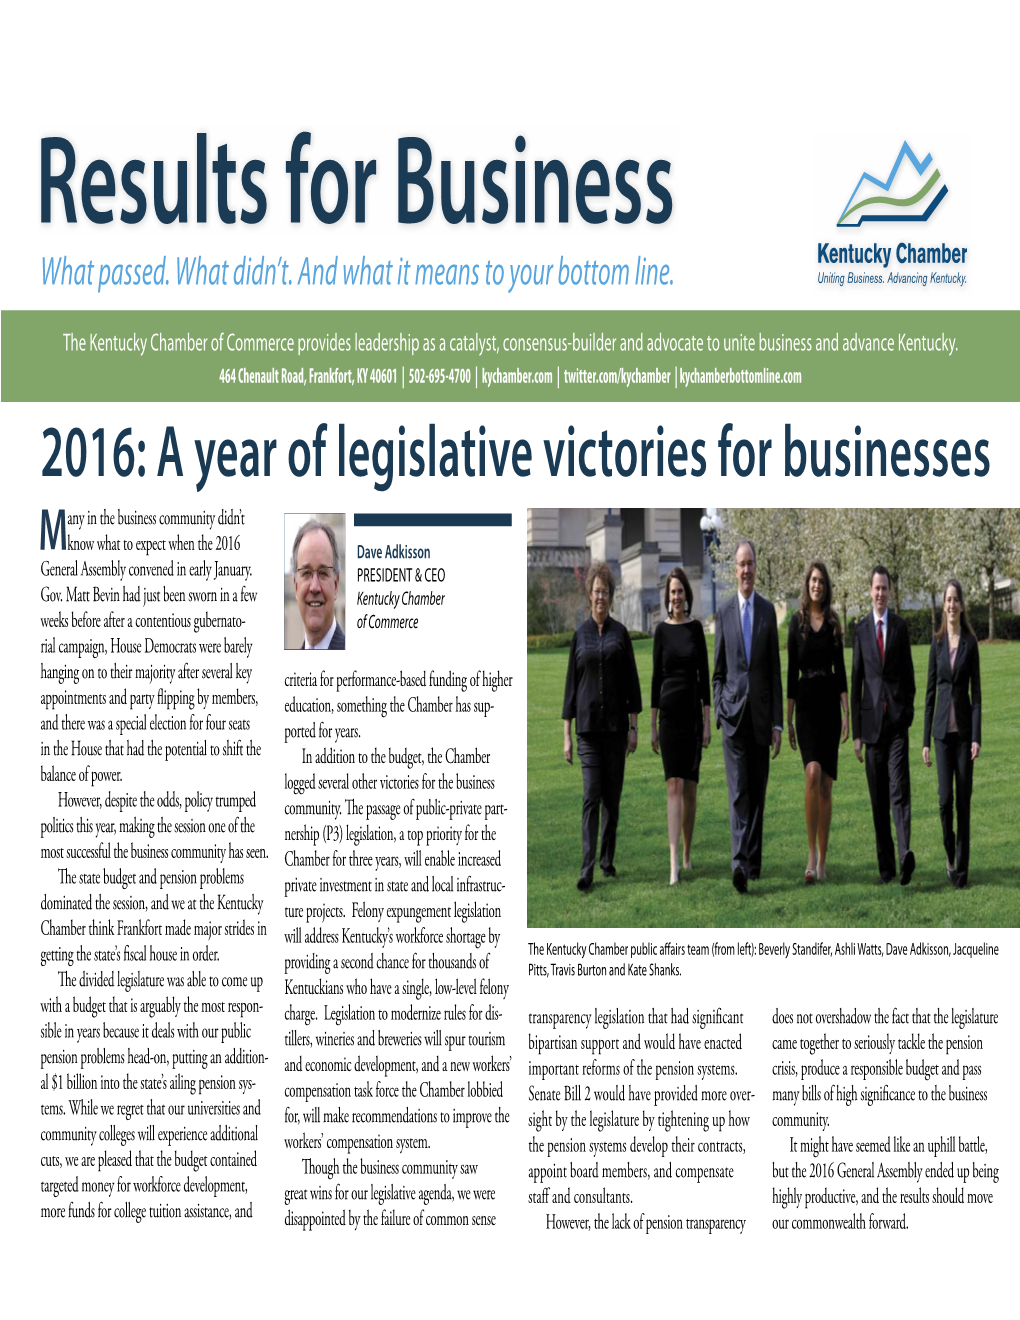 Results for Business 2016